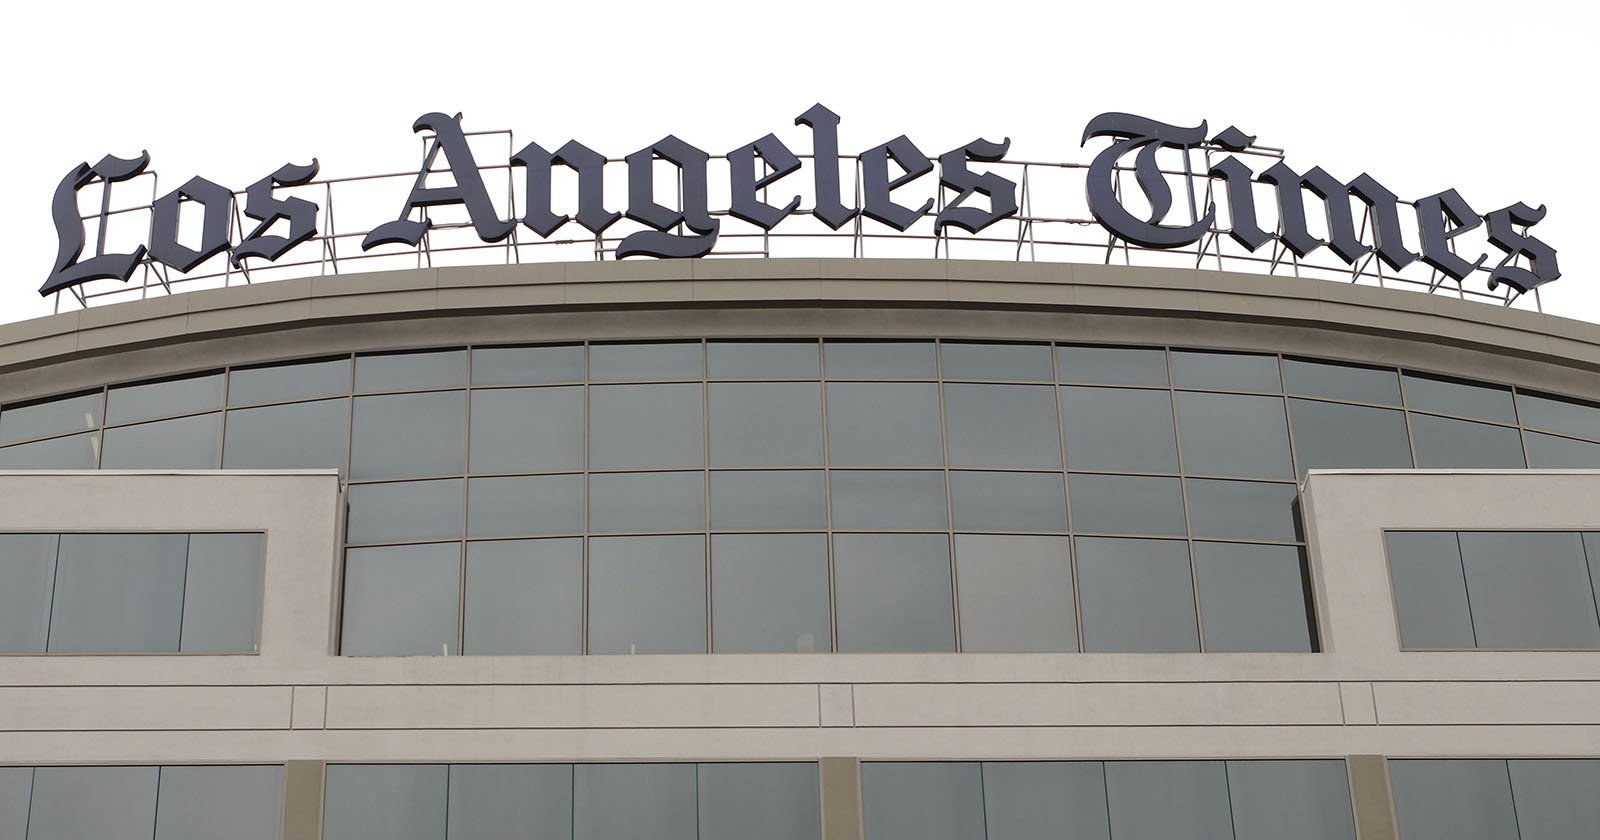 Los Angeles Times layoffs